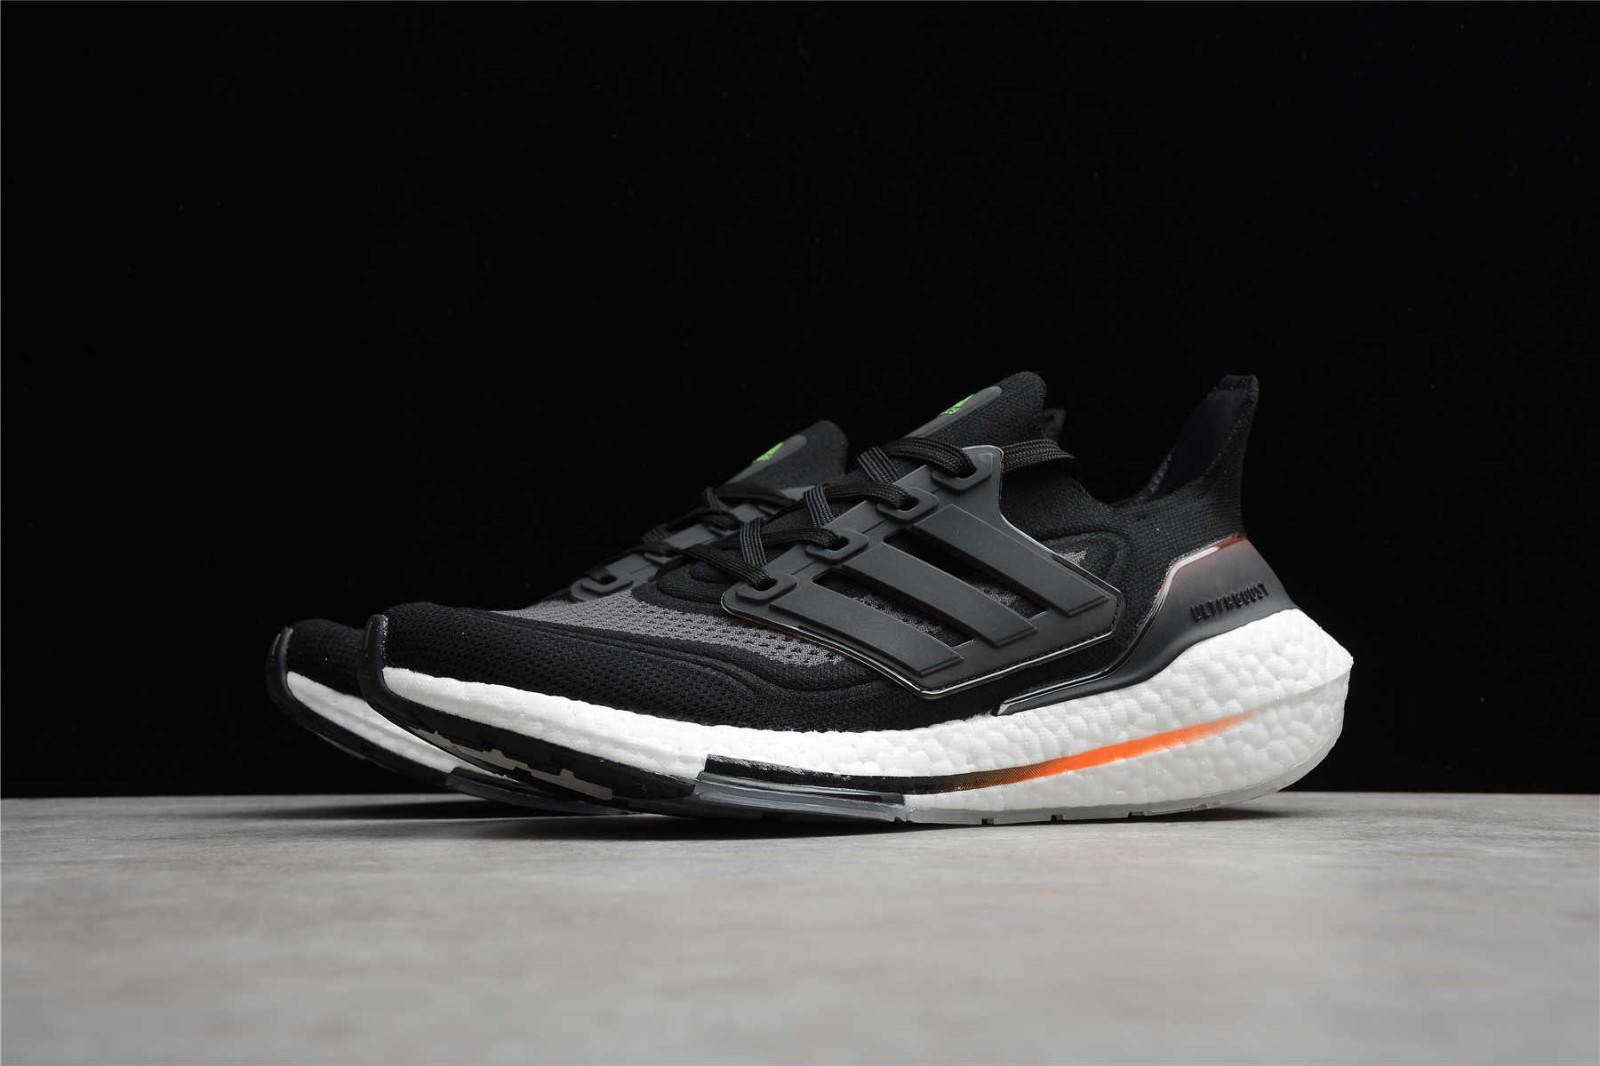 album nå Serrated Adidas Ultra Boost 21 Consortium Core Black Grey Cloud White FZ2056 -  Sepsale - and adidas have this time turned their efforts towards the latters